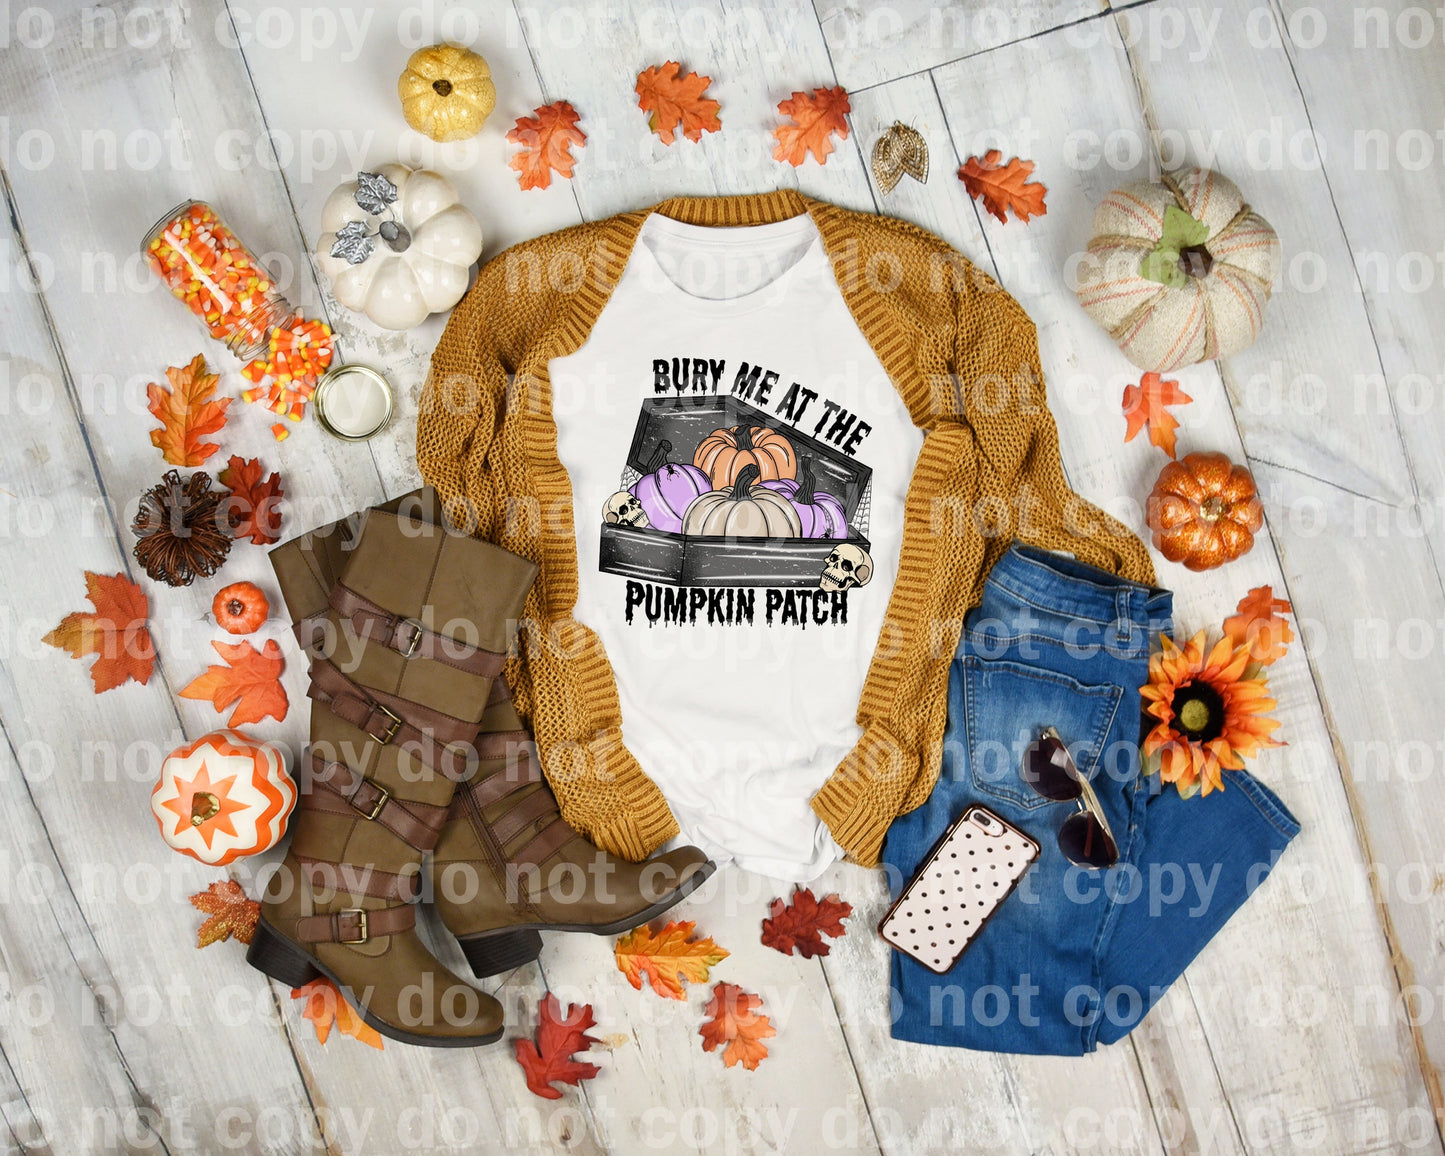 Bury Me At The Pumpkin Patch Dream Print or Sublimation Print